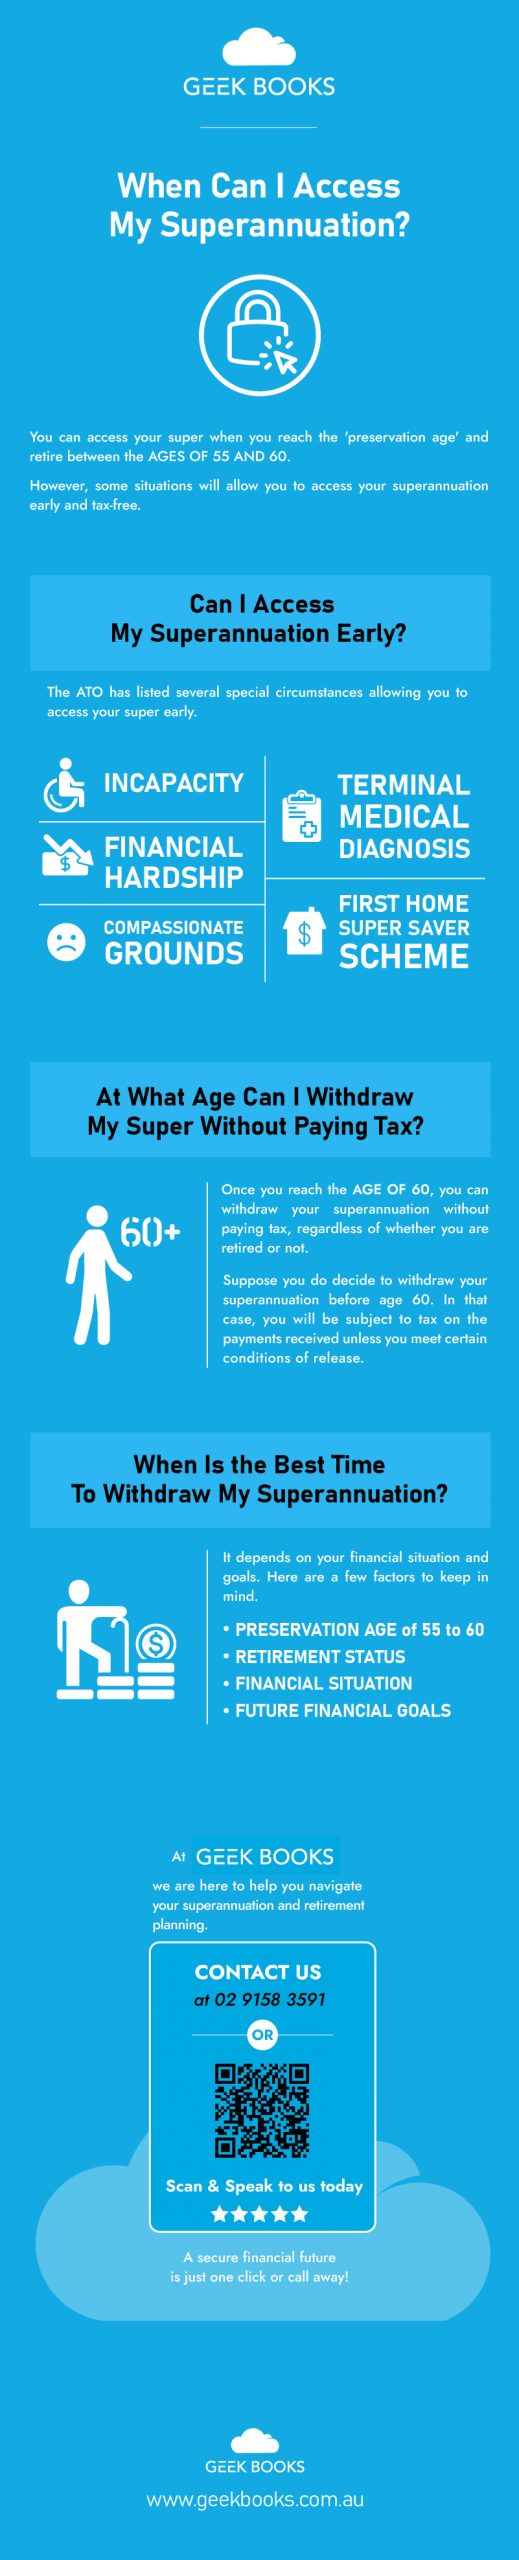 When Can I Access My Superannuation Infographic